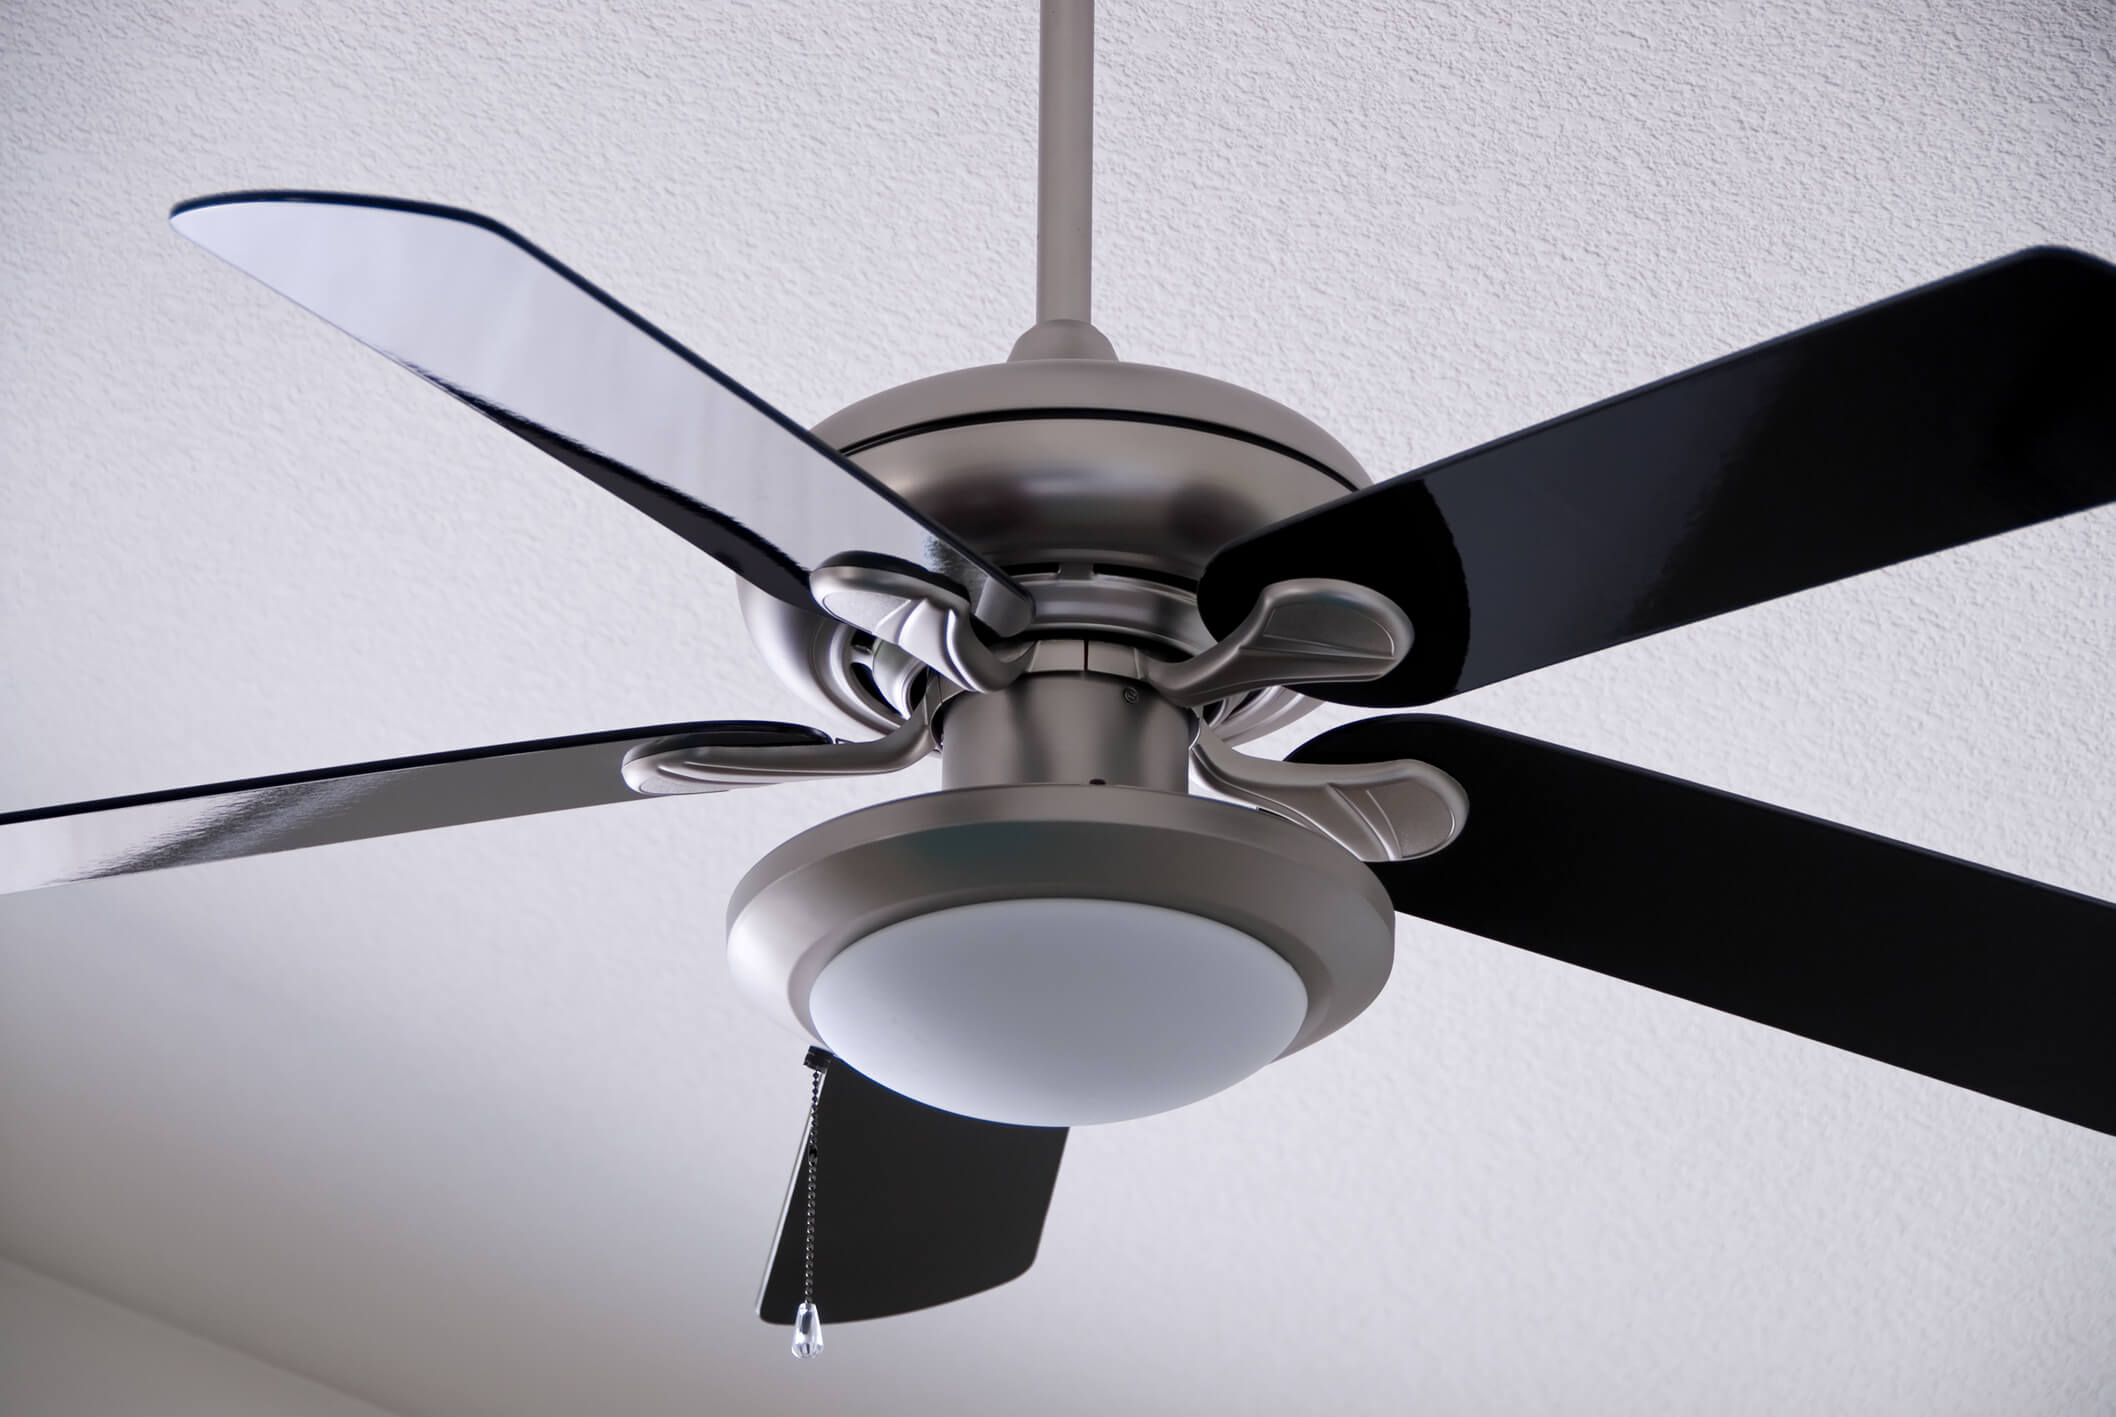 What Direction Should my Ceiling Fan Spin During the Summer?